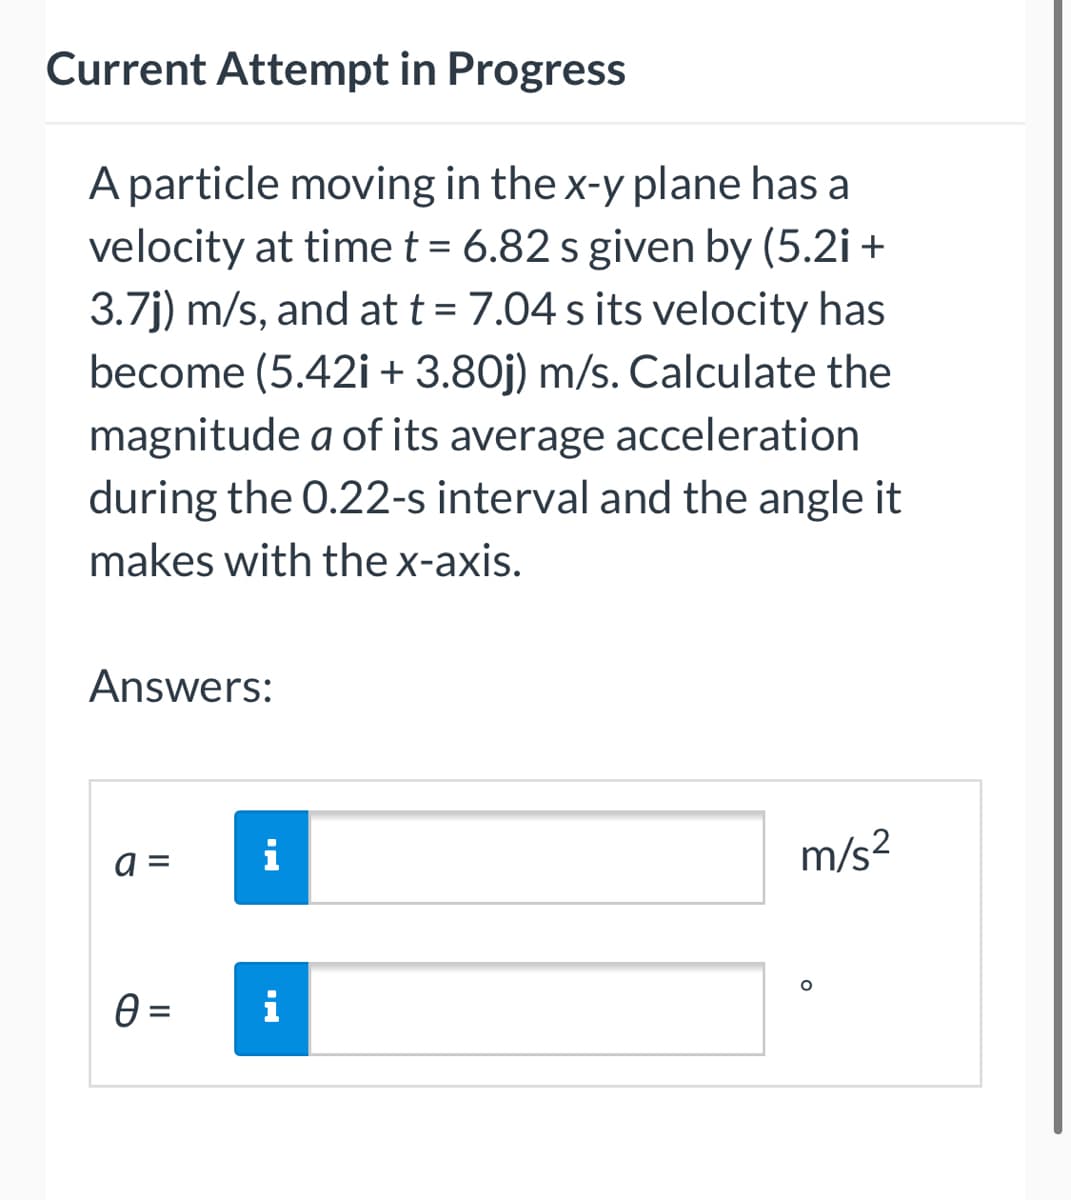 Current Attempt in Progress
A particle moving in the x-y plane has a
velocity at time t = 6.82 s given by (5.2i +
3.7j) m/s, and at t = 7.04 s its velocity has
become (5.42i + 3.80j) m/s. Calculate the
magnitude a of its average acceleration
during the 0.22-s interval and the angle it
makes with the x-axis.
Answers:
a =
i
m/s²
0 = i
O